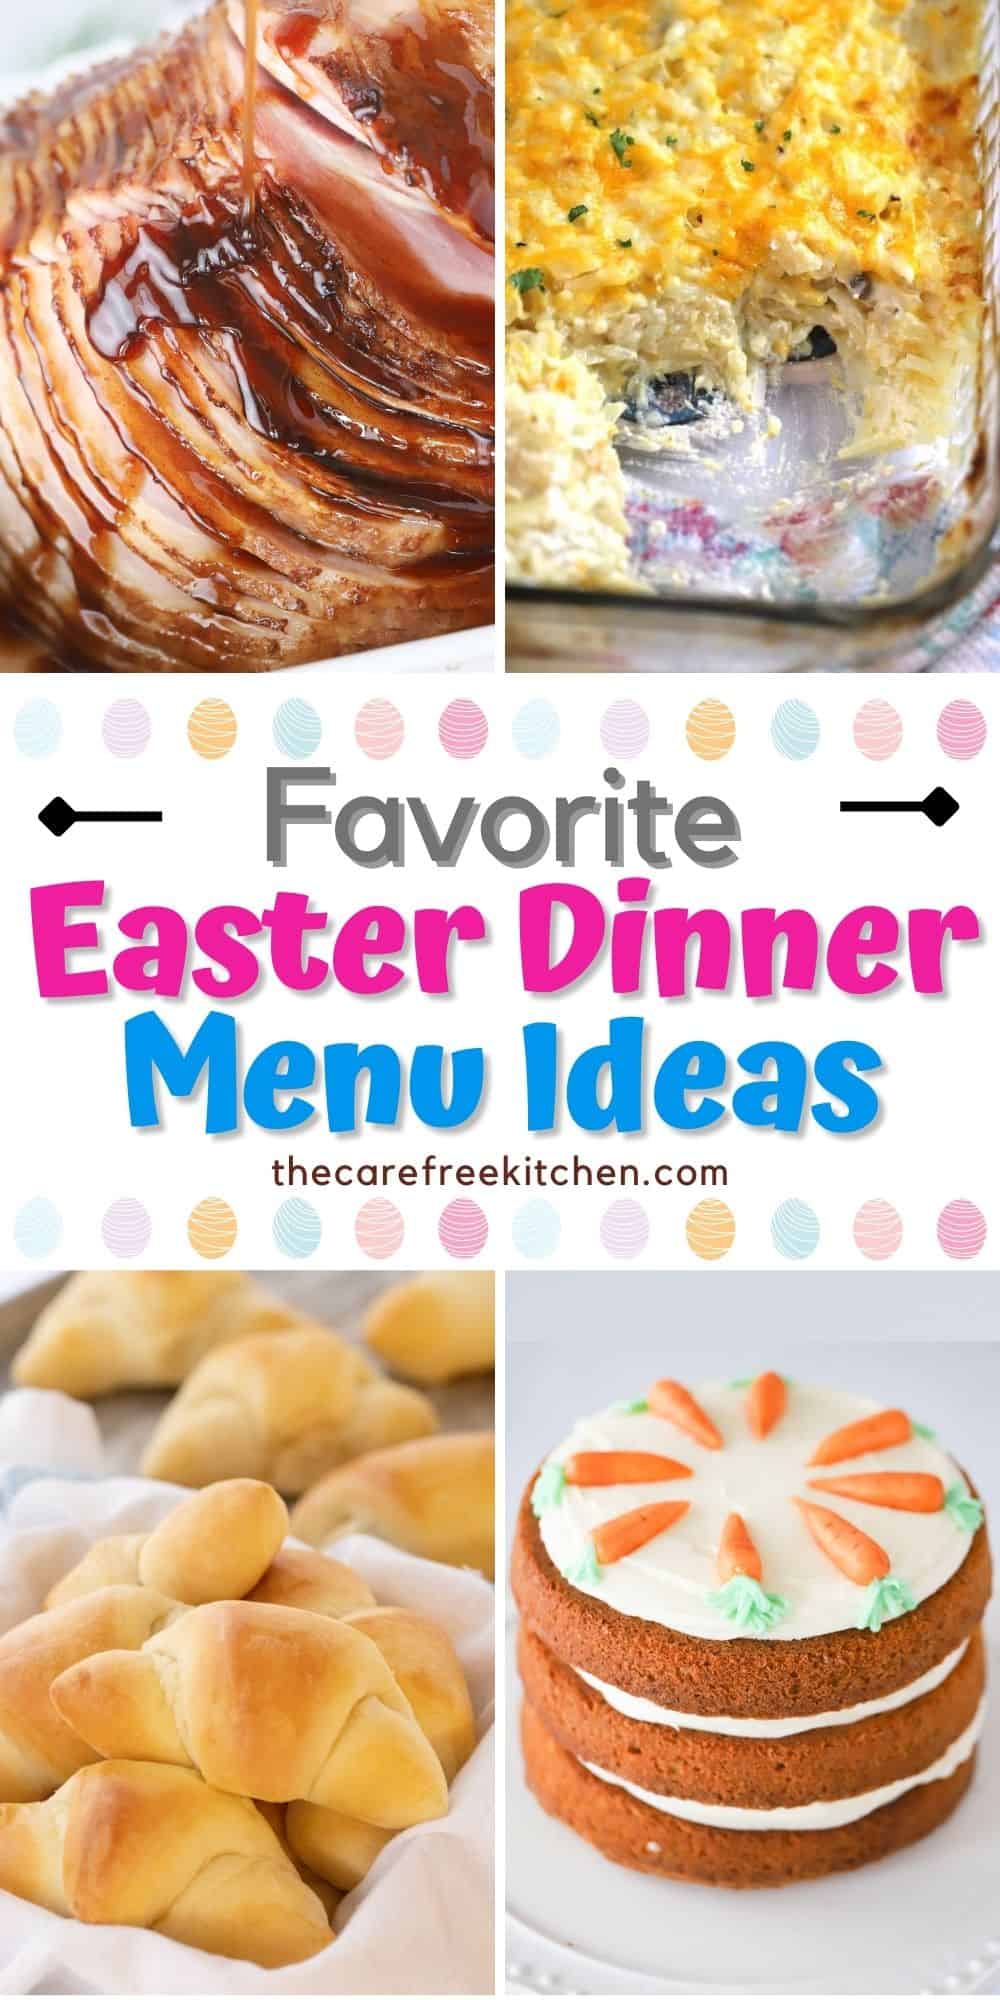 Easy Easter Dinner Recipes - The Carefree Kitchen